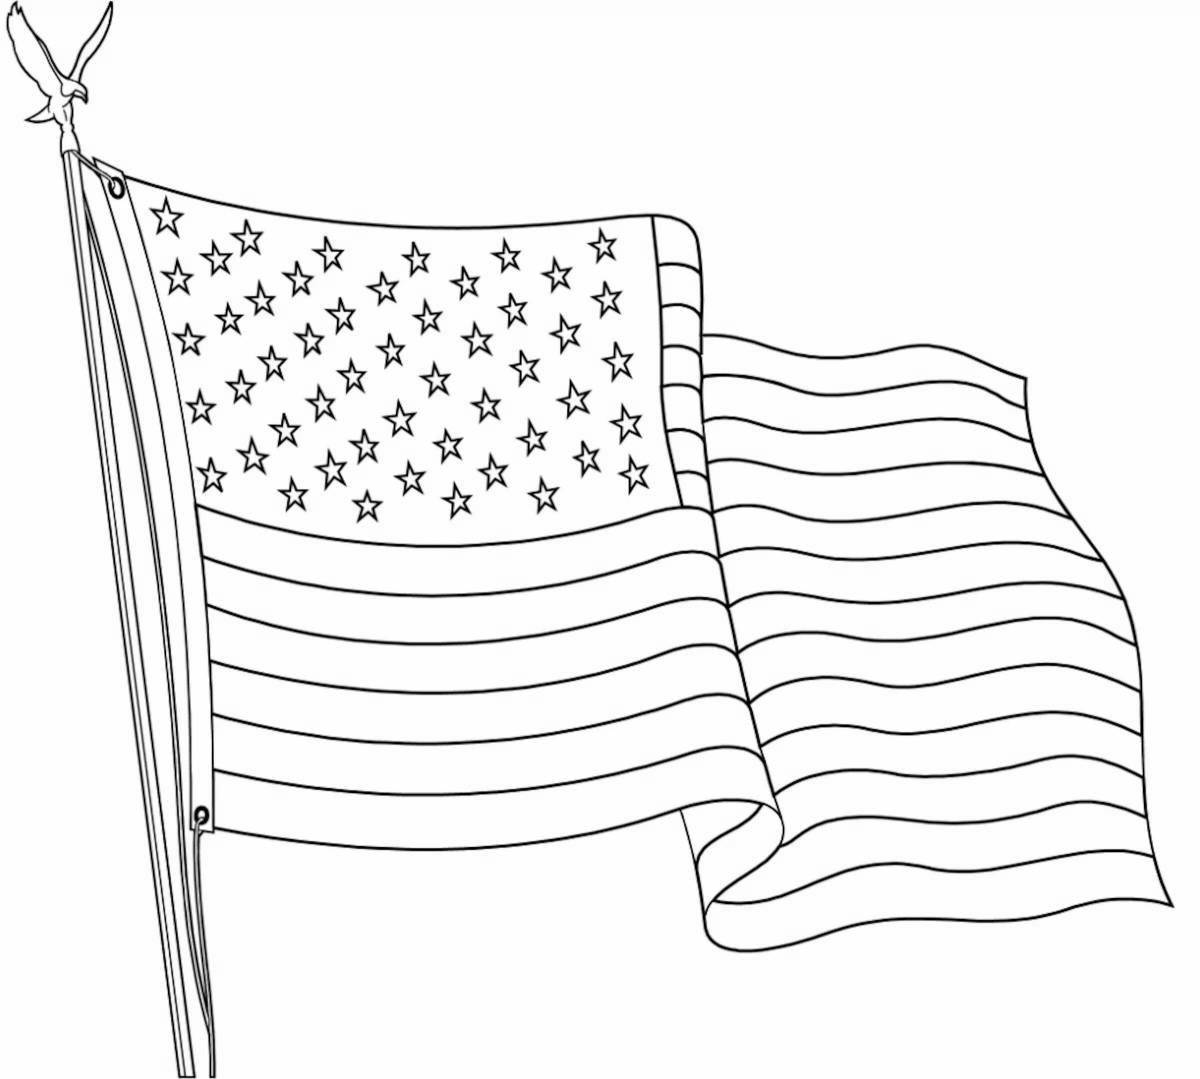 Coloring flags for kids